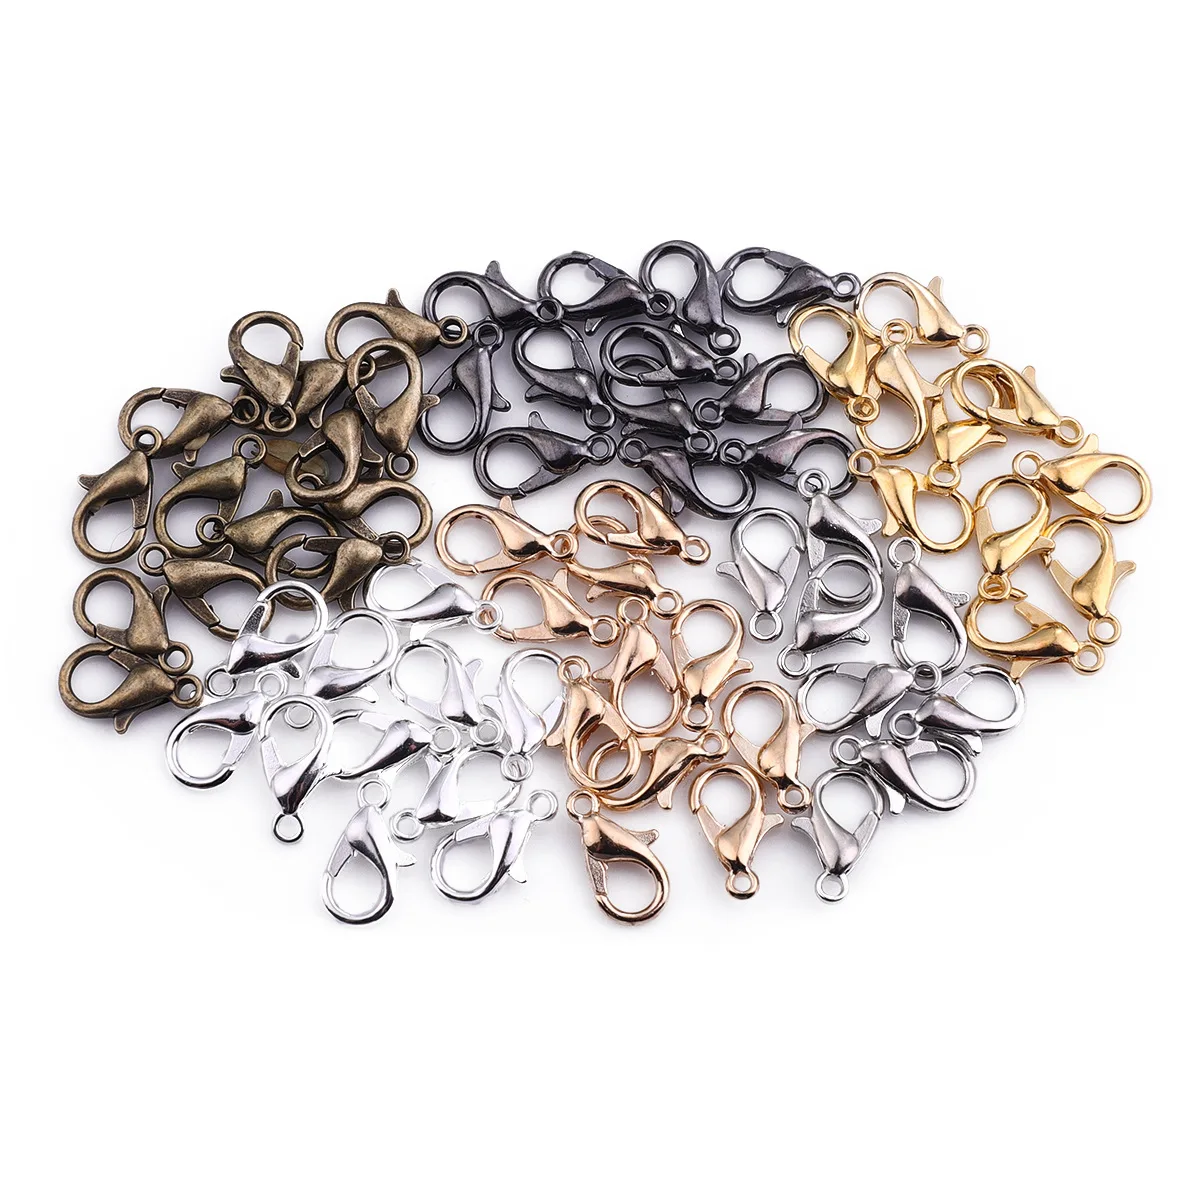 

50PCS 10mm/12mm/14mm/16mm/18mm 9 Color Plated Fashion Jewelry Findings,Alloy Lobster Clasp Hooks for Necklace&Bracelet Chain DIY